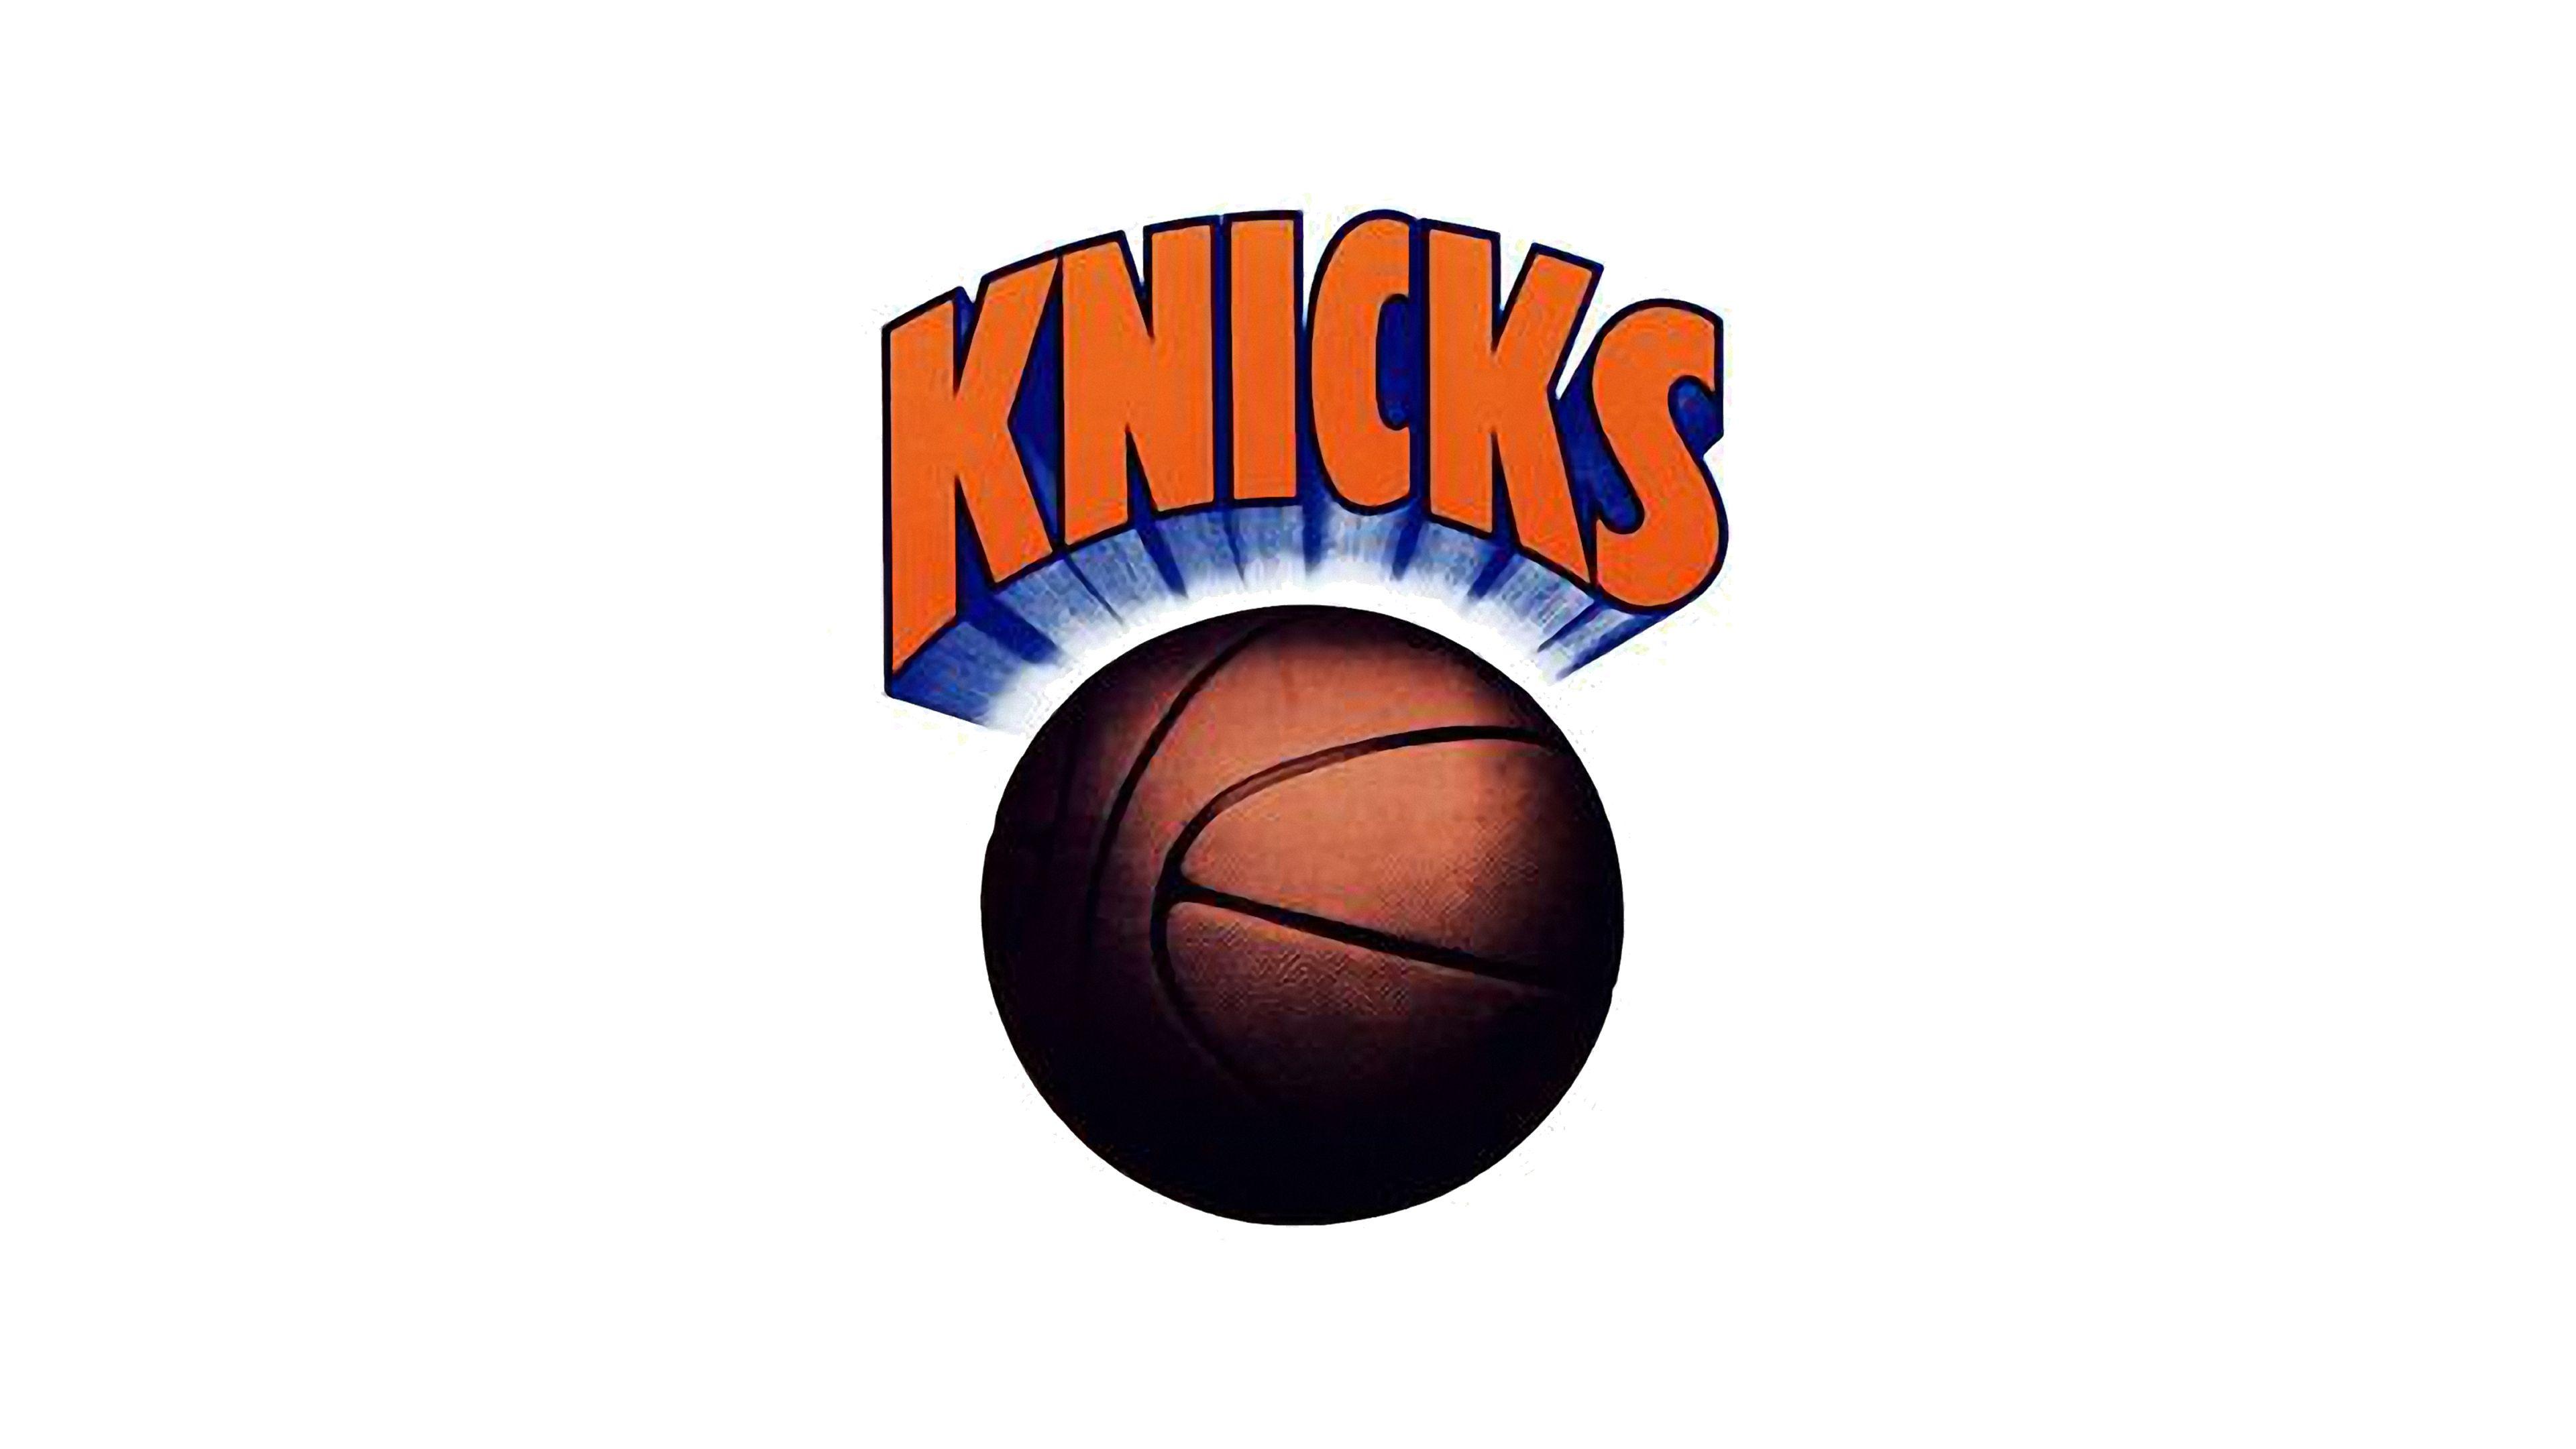 New York Knicks Logo - New York Knicks logo - Interesting History of the Team Name and emblem